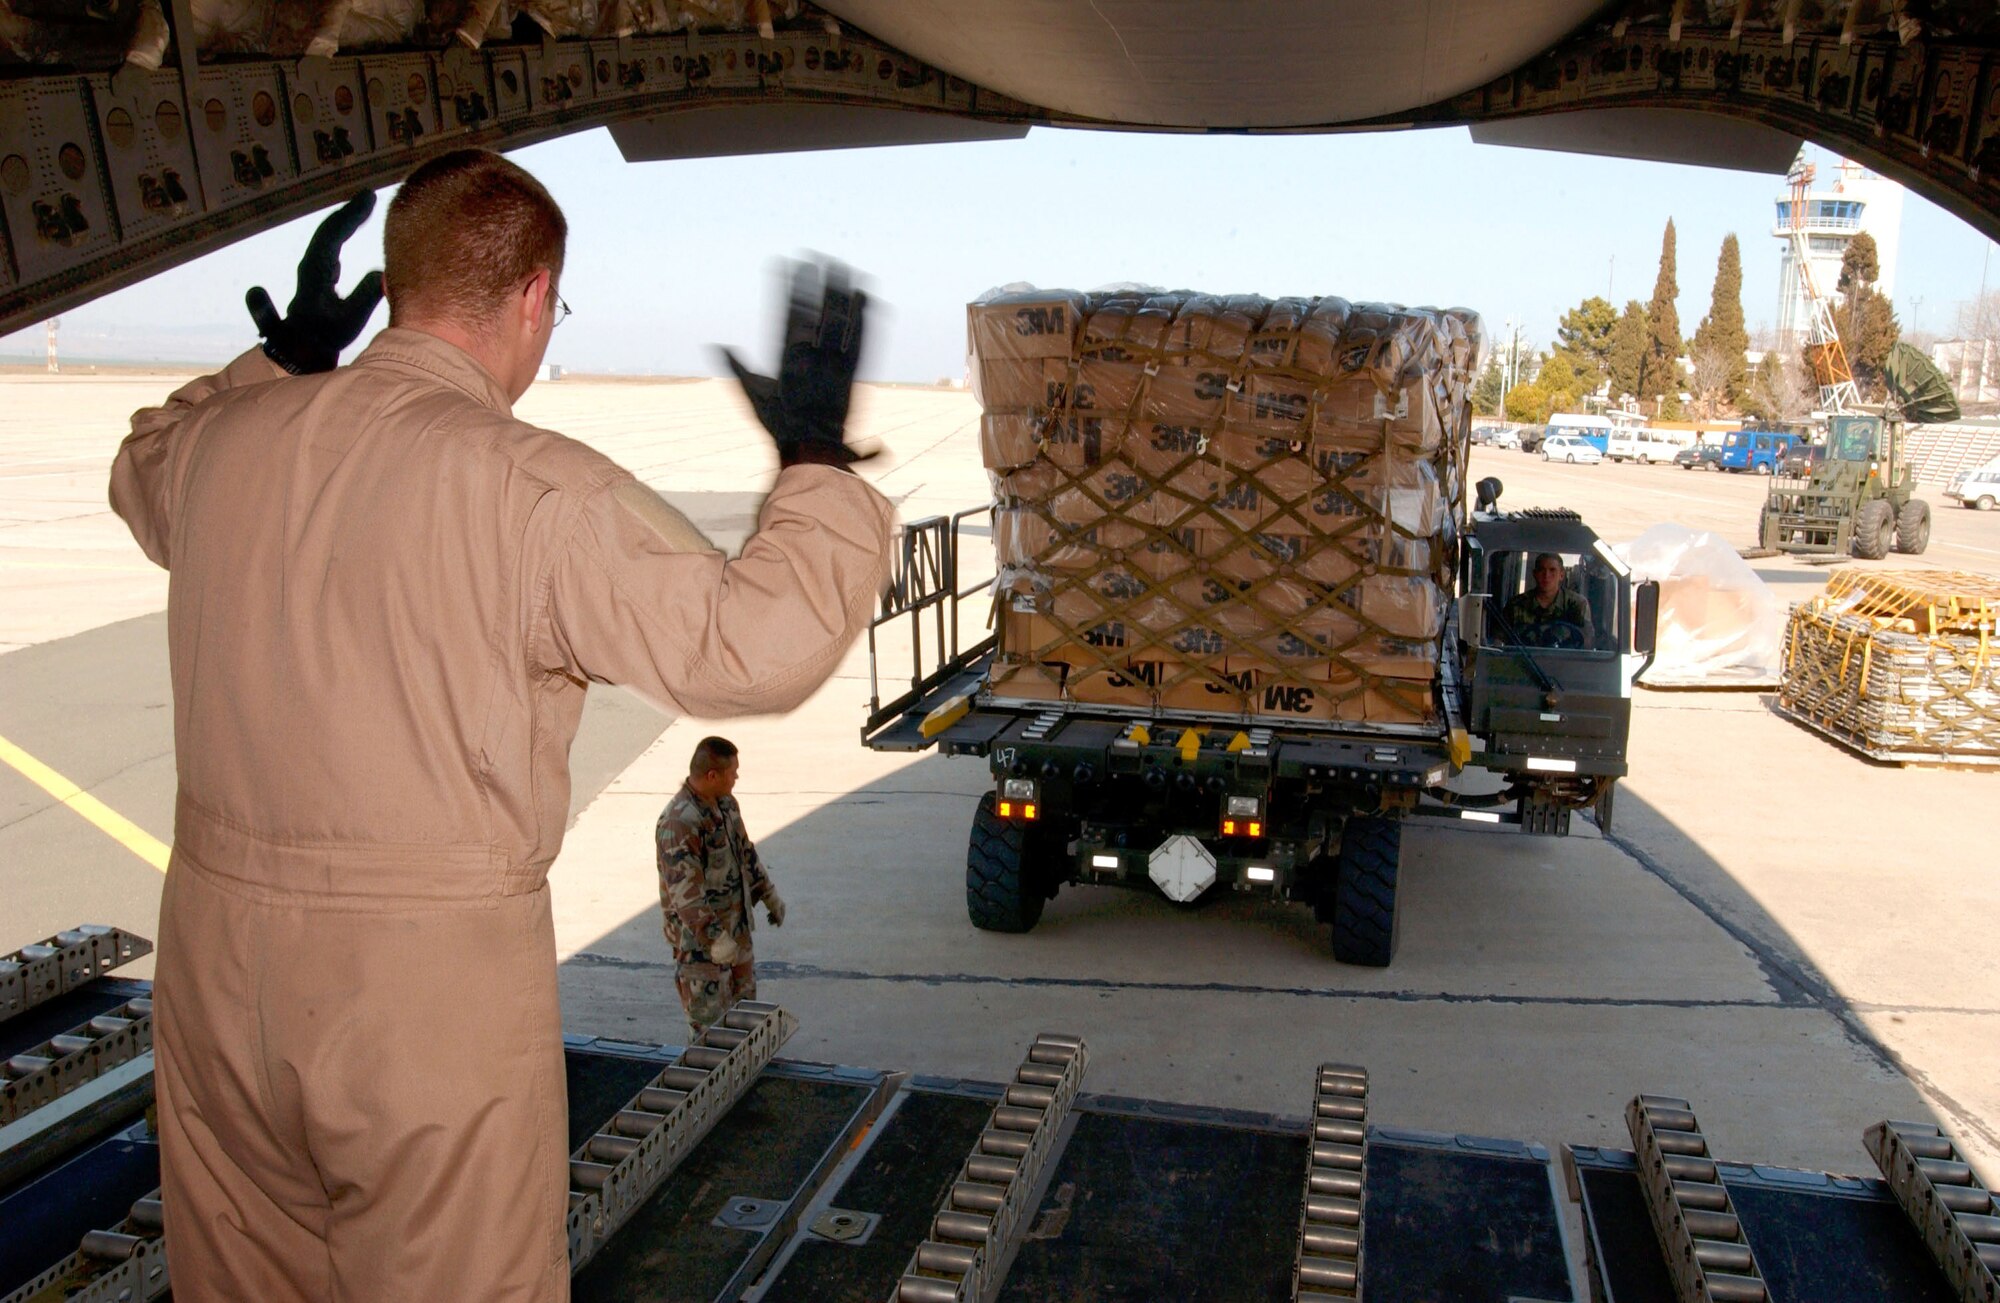 OPERATION IRAQI FREEDOM -- A crewmember guides a pallet of cargo onto a C-17 Globemaster III.  The aircraft landed a Burgas Airport on its way to deliver humanitarian aid to the people of Iraq.  (U.S. Air Force photo by Master Sgt. Dave Ahlschwede)